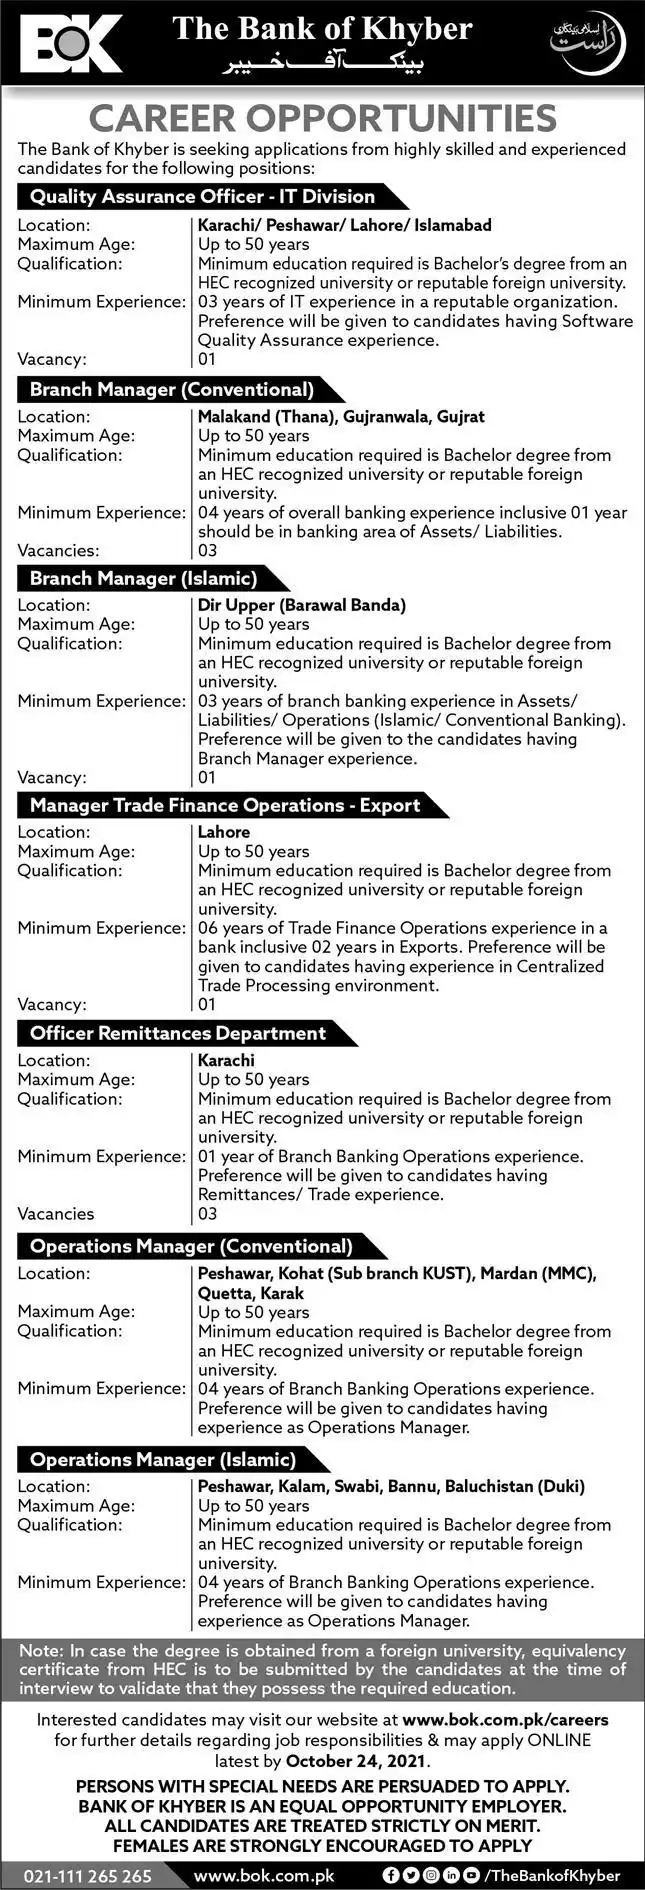 The Bank of Khyber Careers